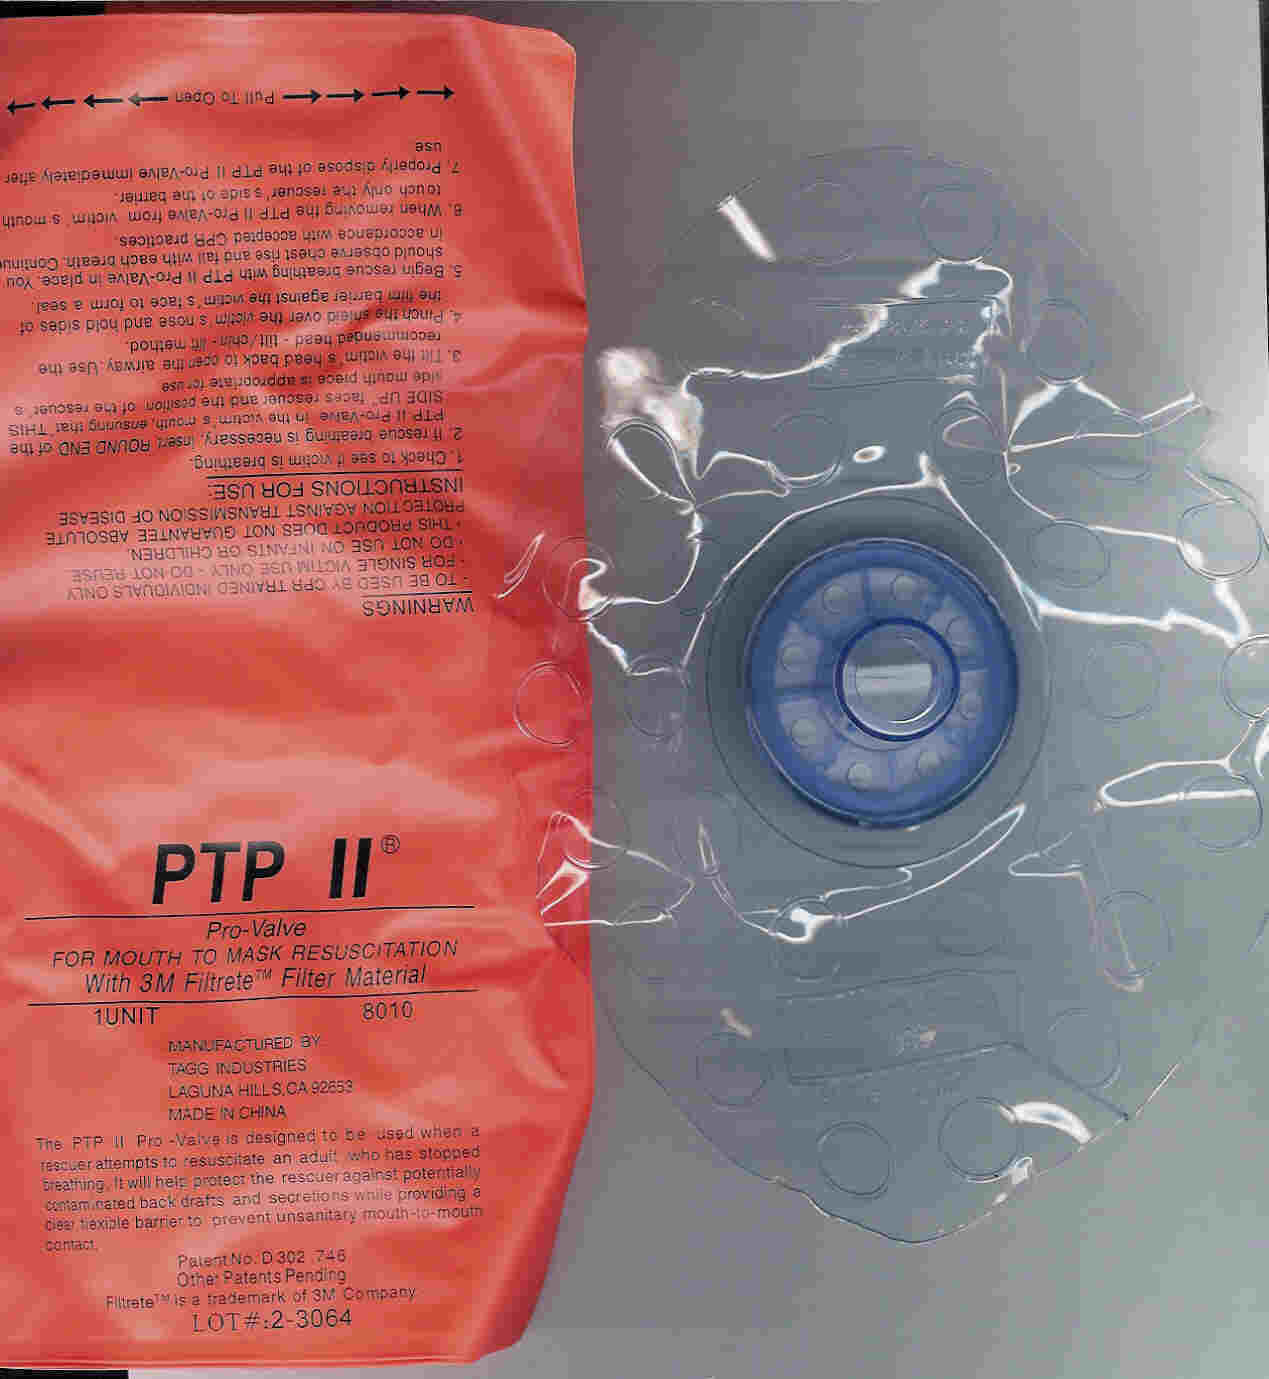 Ptp ii pro-valve for cpr - eliminate mouth contact